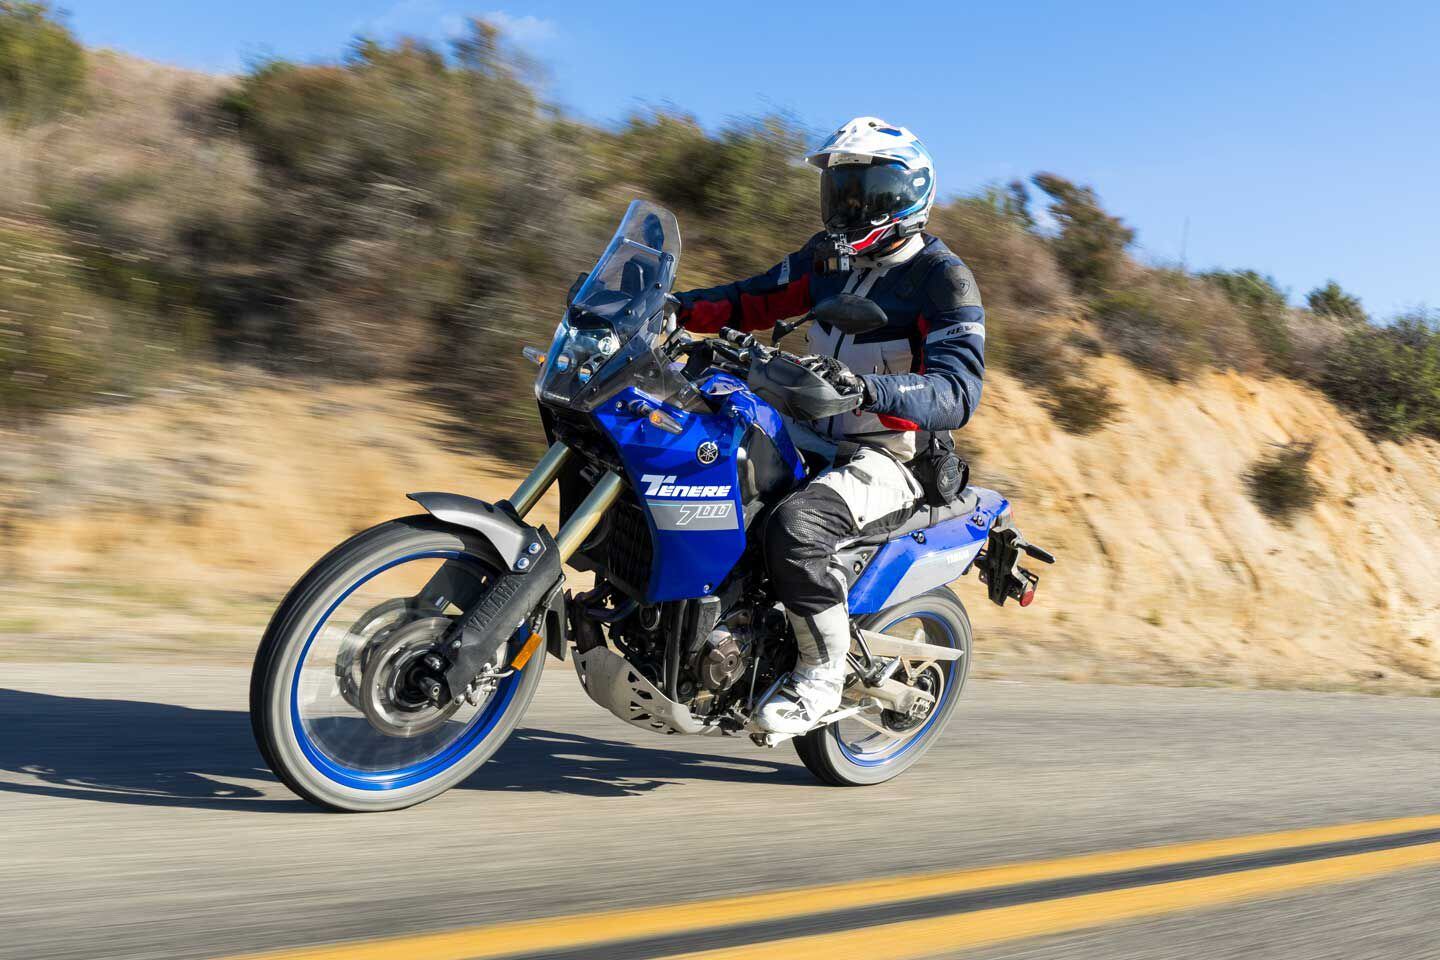 Adventure riders seeking a functional and rugged midsize ADV that is equally capable on road as it is off will value what Yamaha brings to the table with its 2024 Ténéré 700.